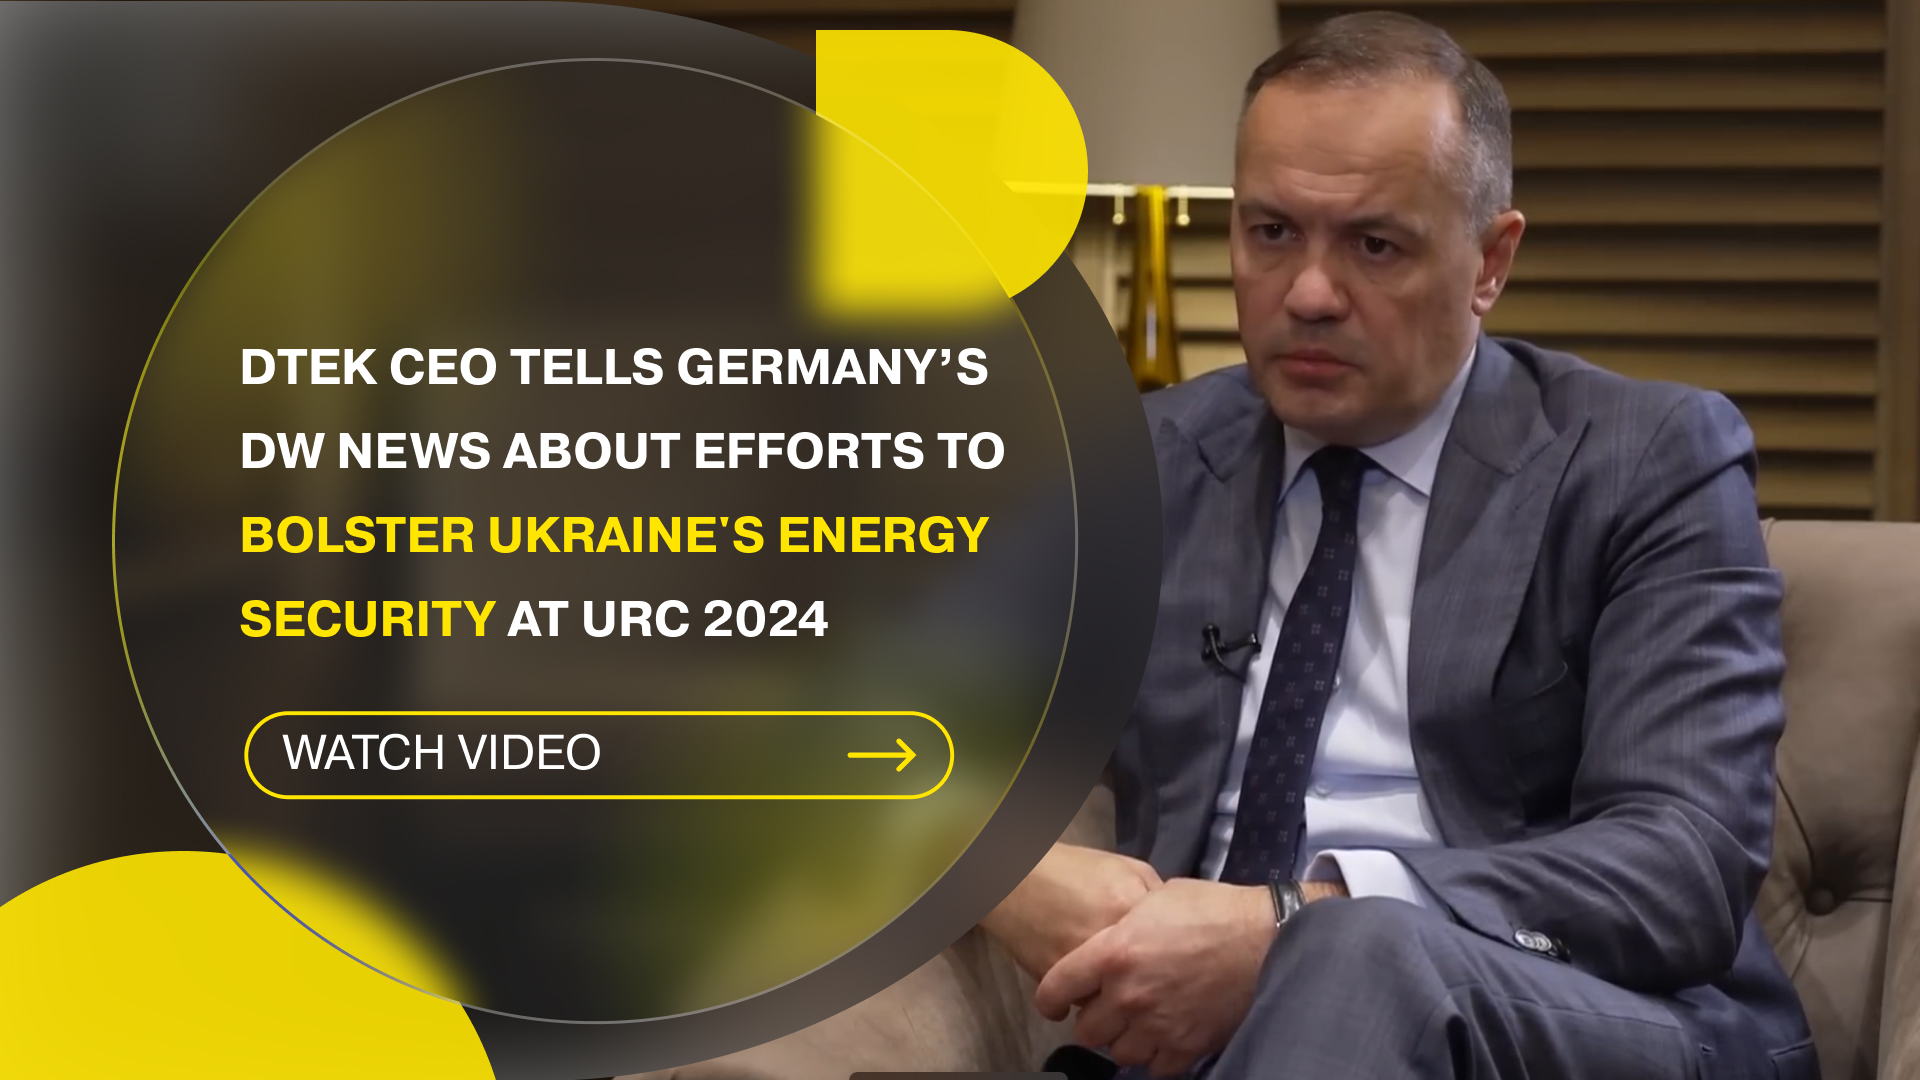 DTEK CEO tells Germany’s DW News about efforts to bolster Ukraine's energy security at URC, appeals for stronger air defense